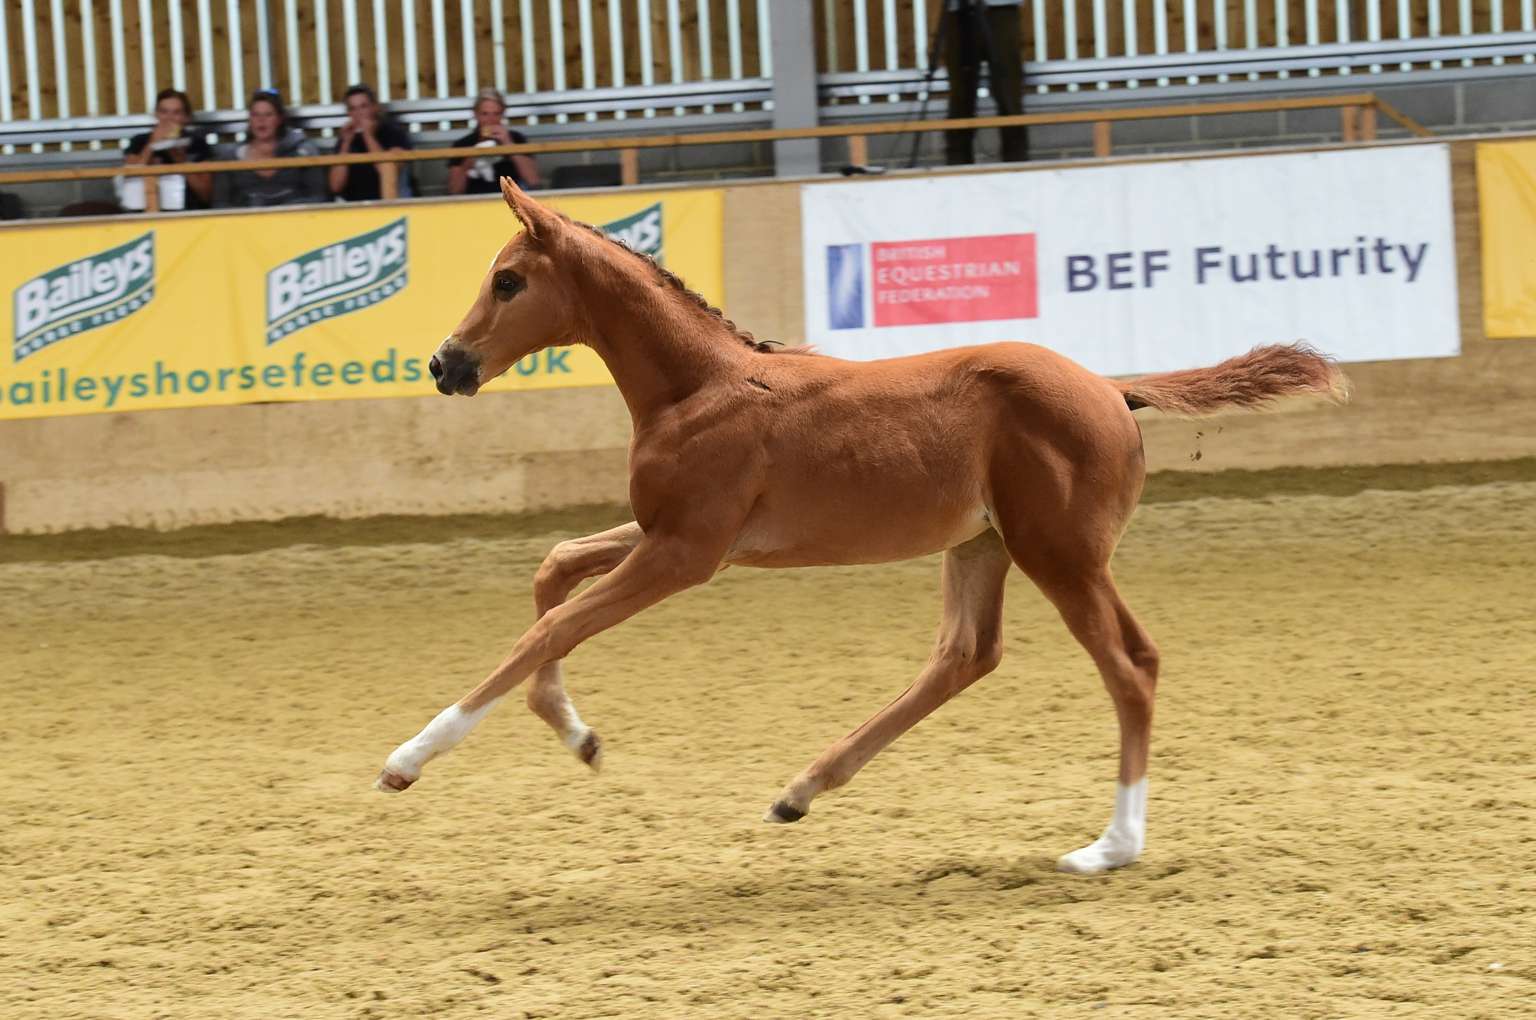 BEF Futurity - Filly goal Florouche JT attained an elite premium in 2015. Credit Kevin Sparrow